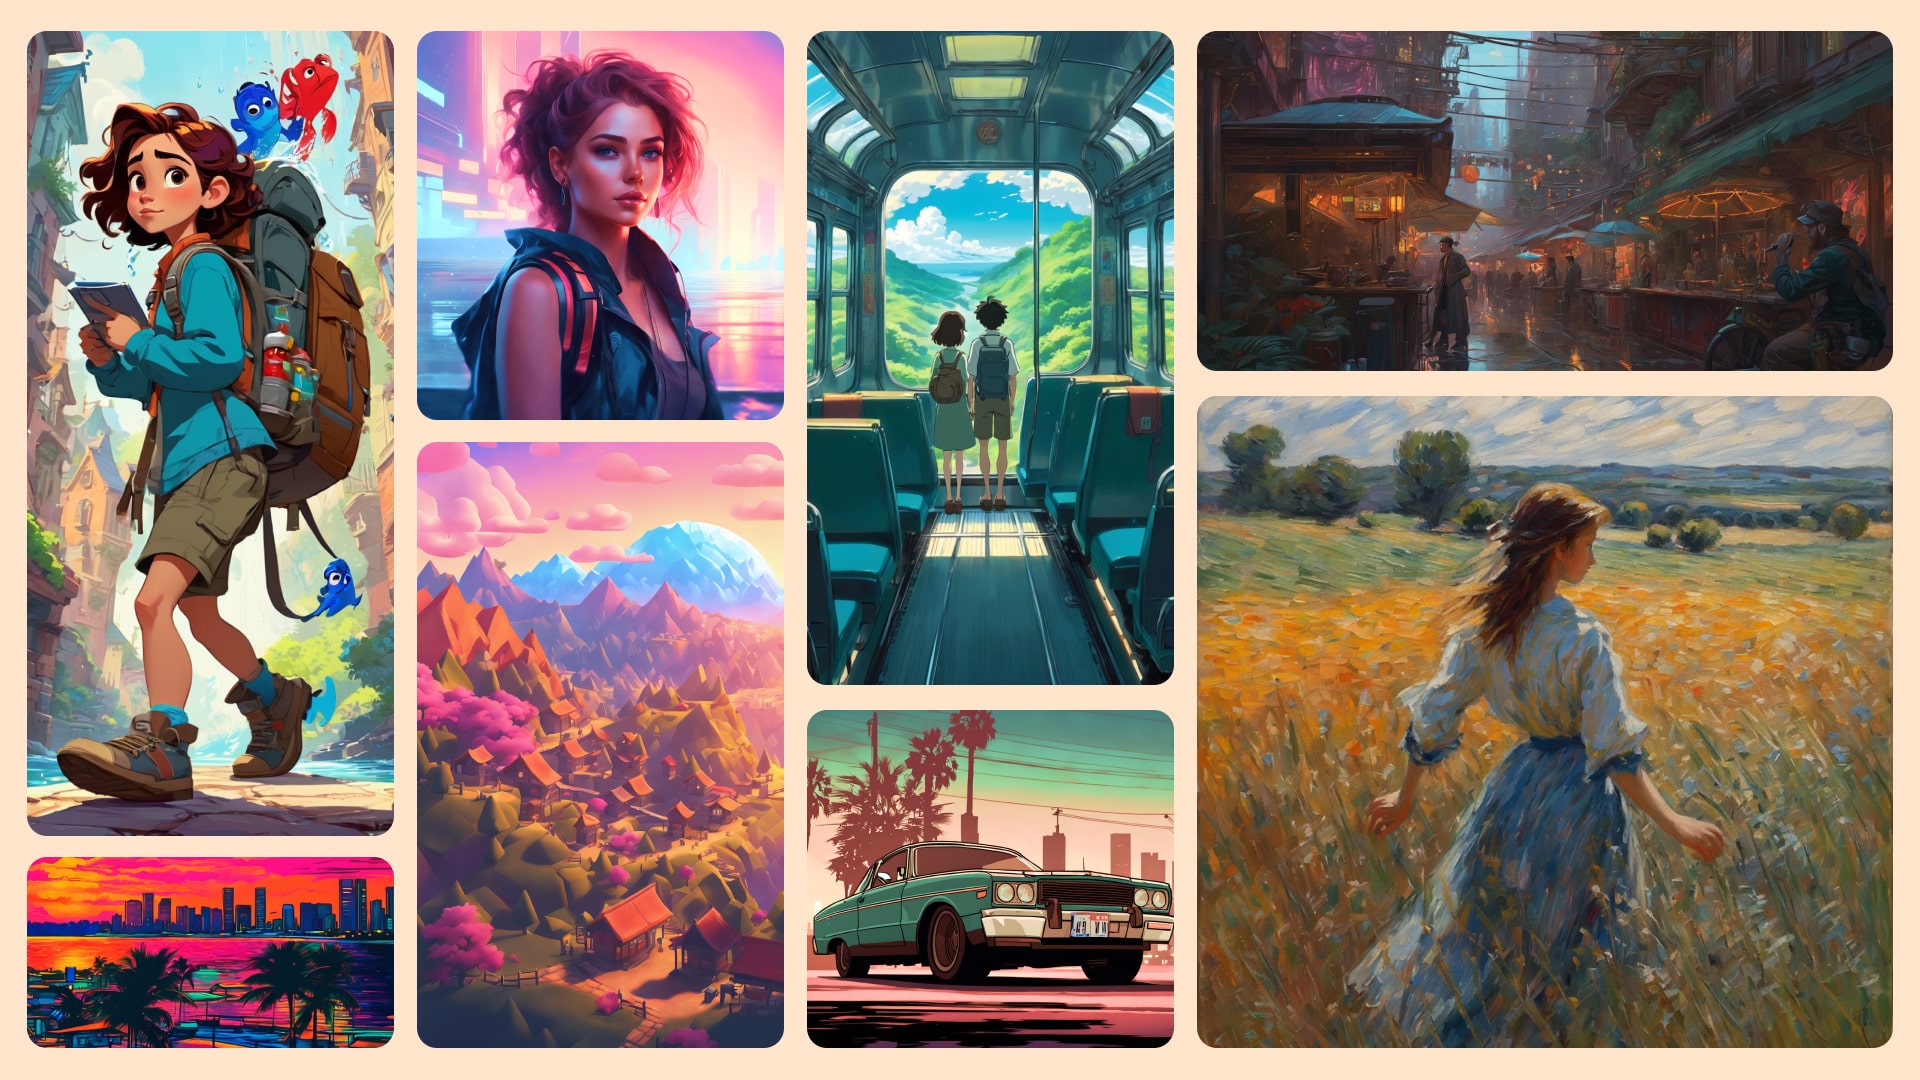 A visual representation of diverse art styles generated by Imagine AI, showcasing realism, anime, surrealism, and more.